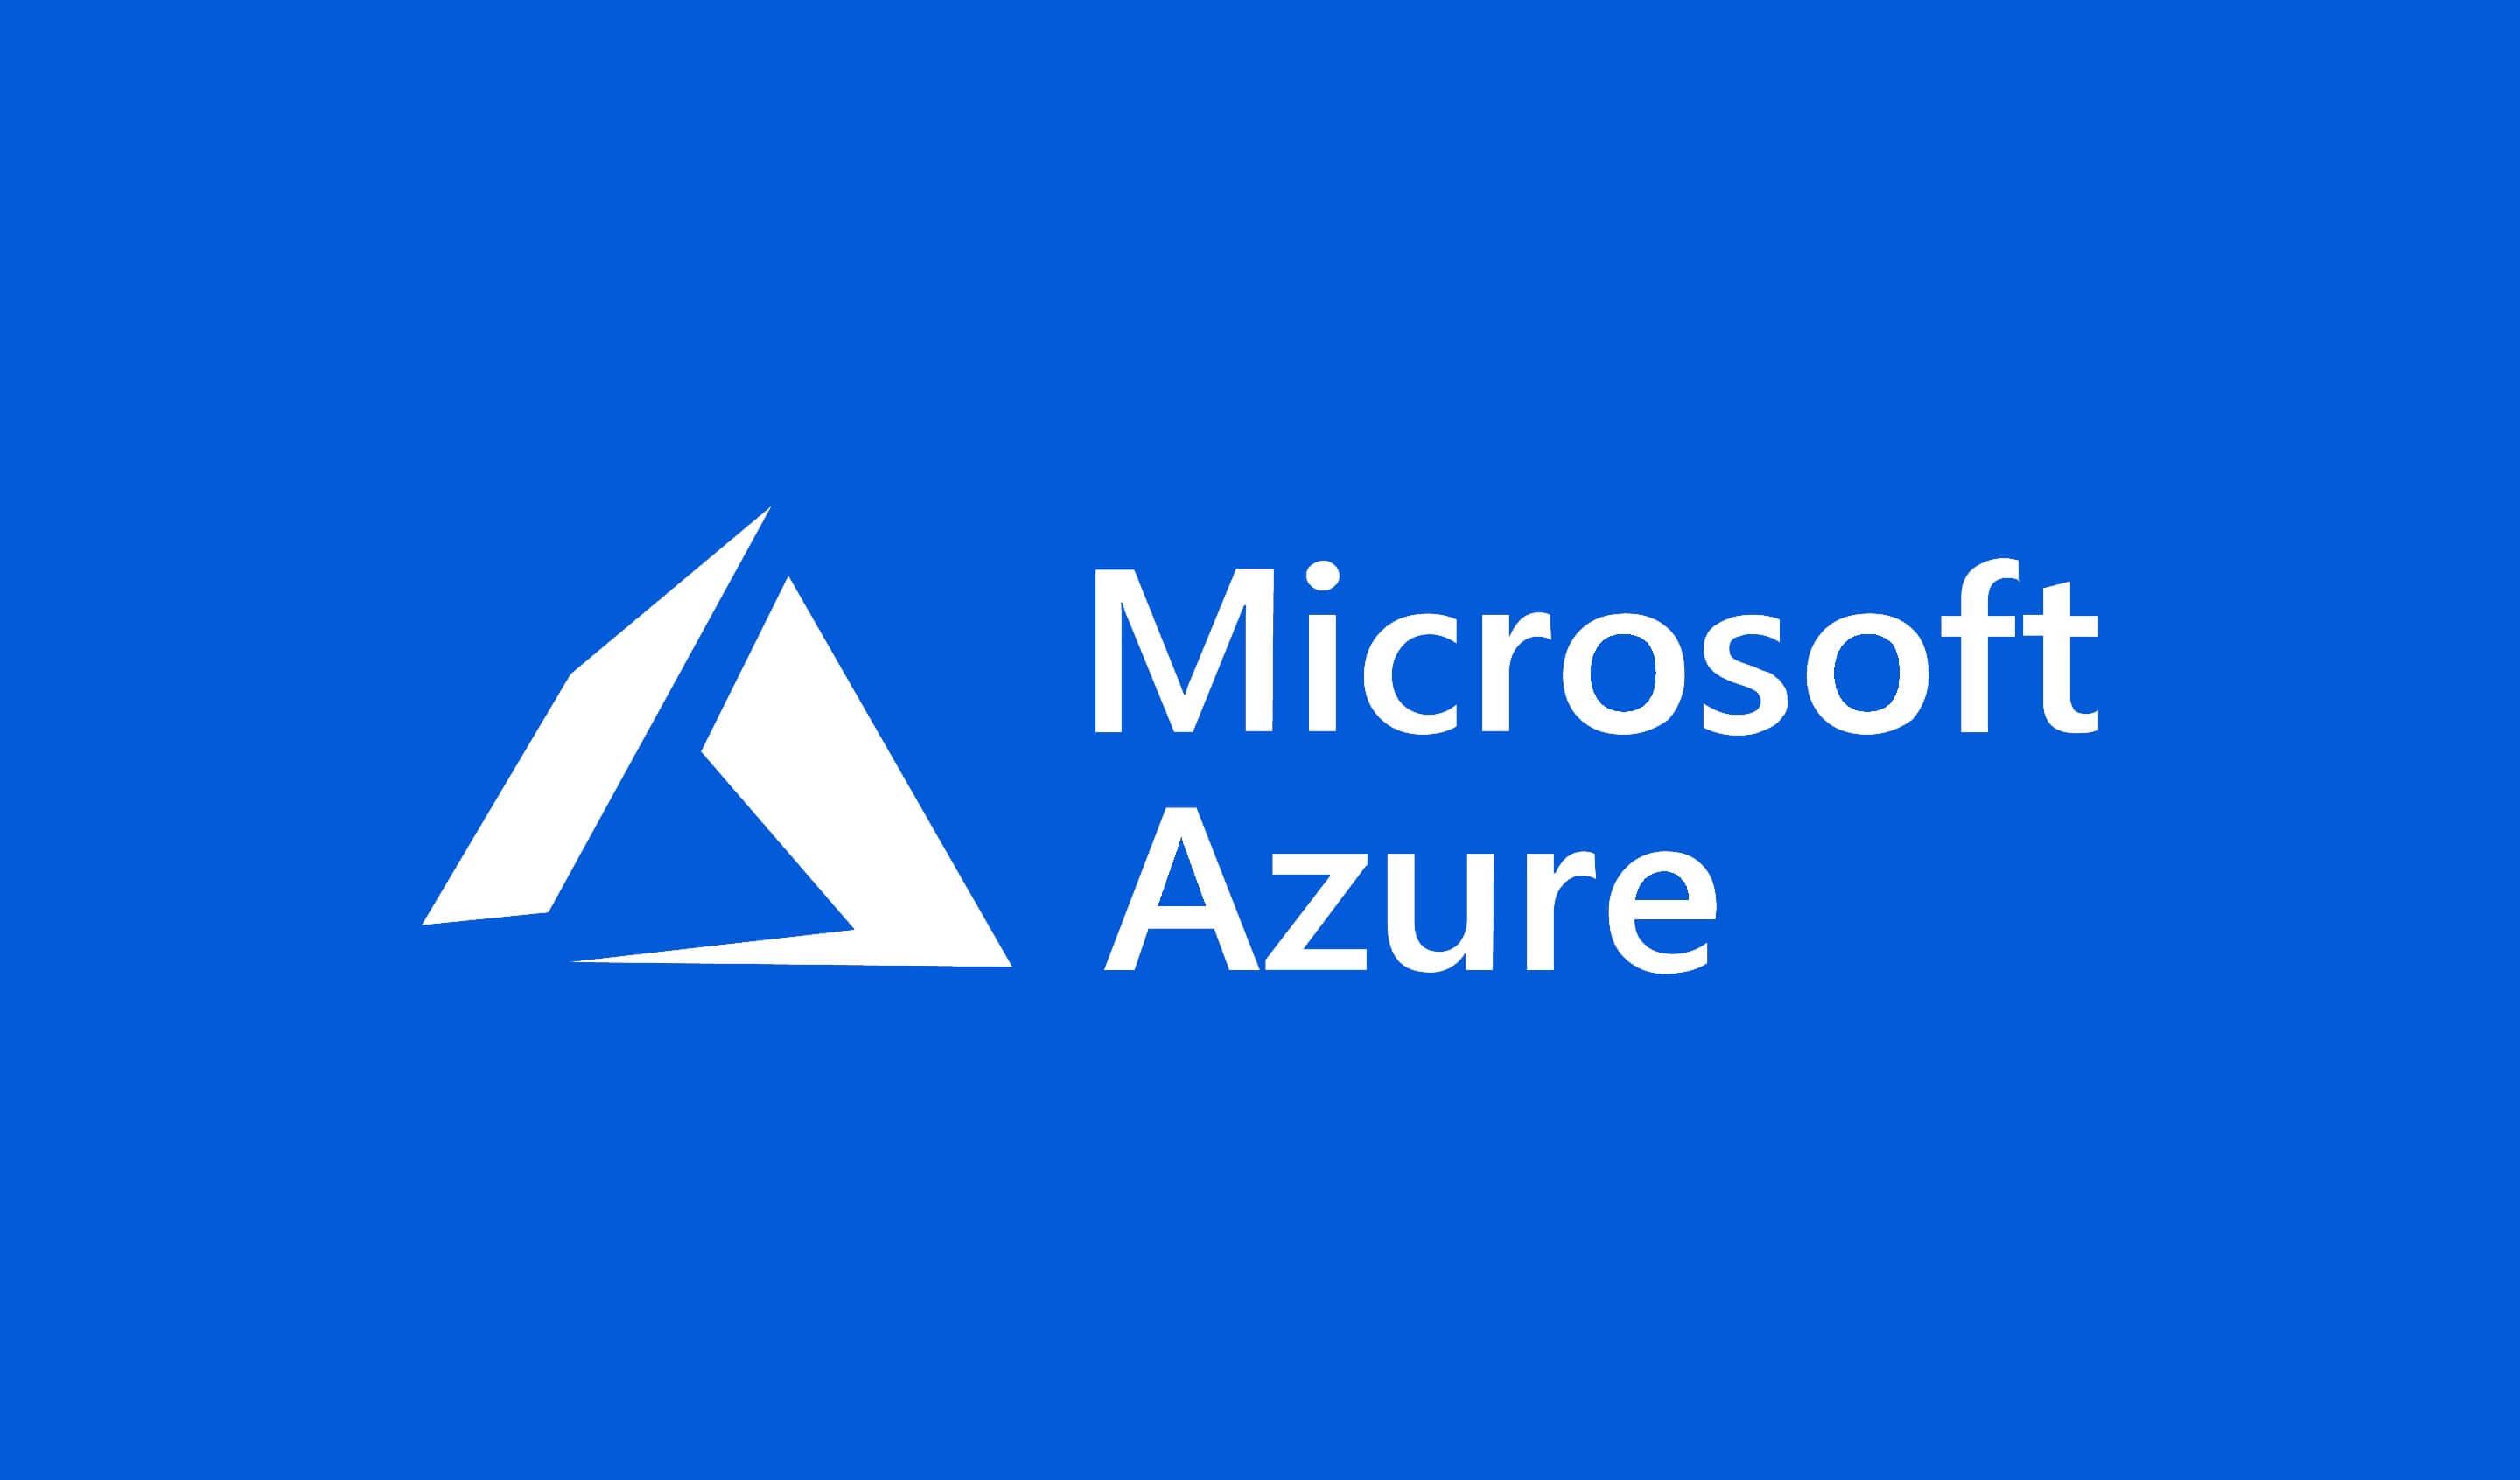 Building-Highly-Scalable-Apps-with-Microsoft-Azure-1.jpg